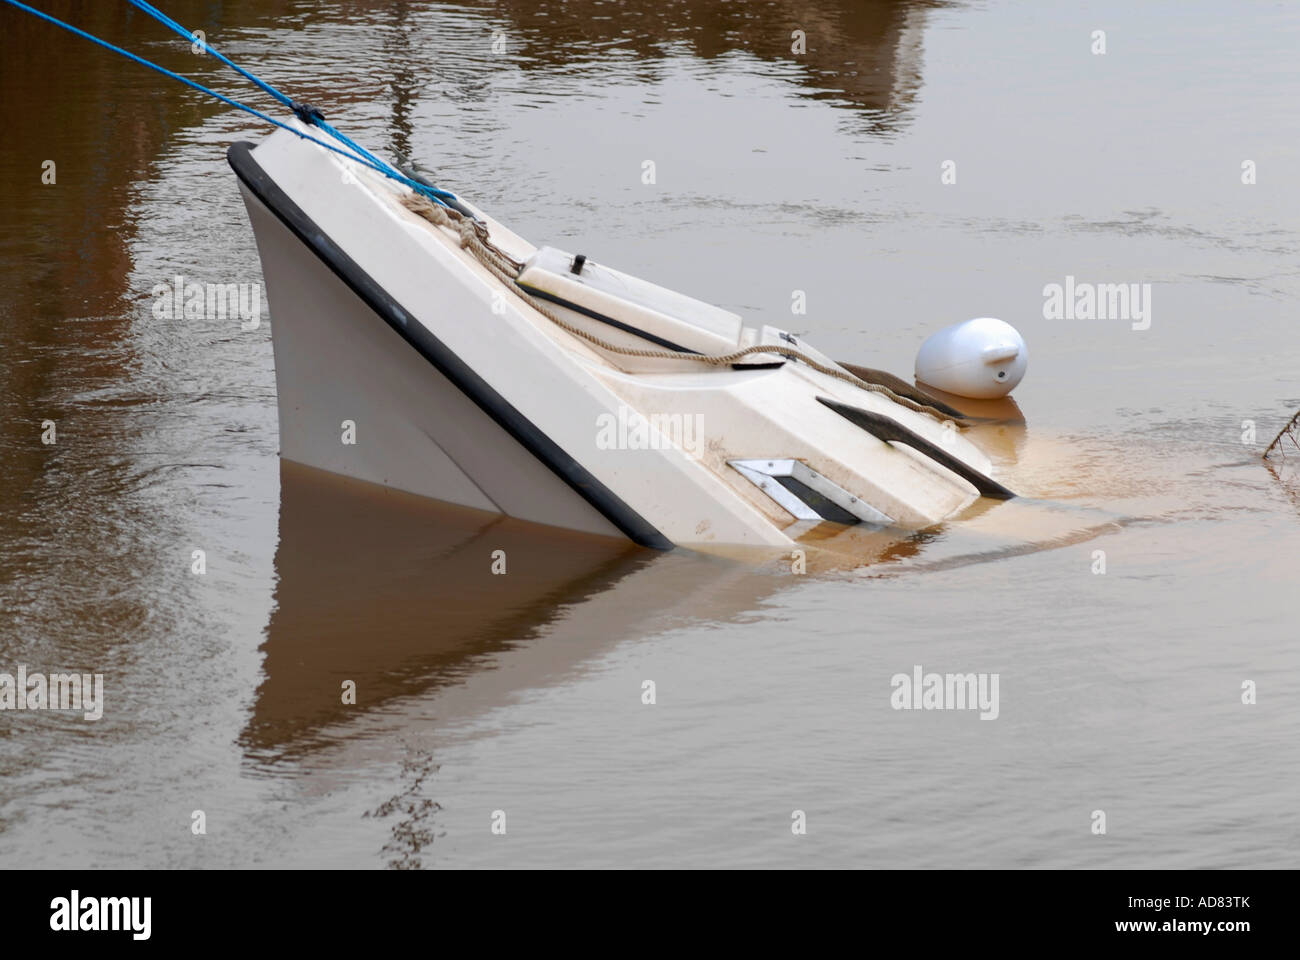 Sunken boat during the floods at Tewkesbury July 2007 Stock Photo